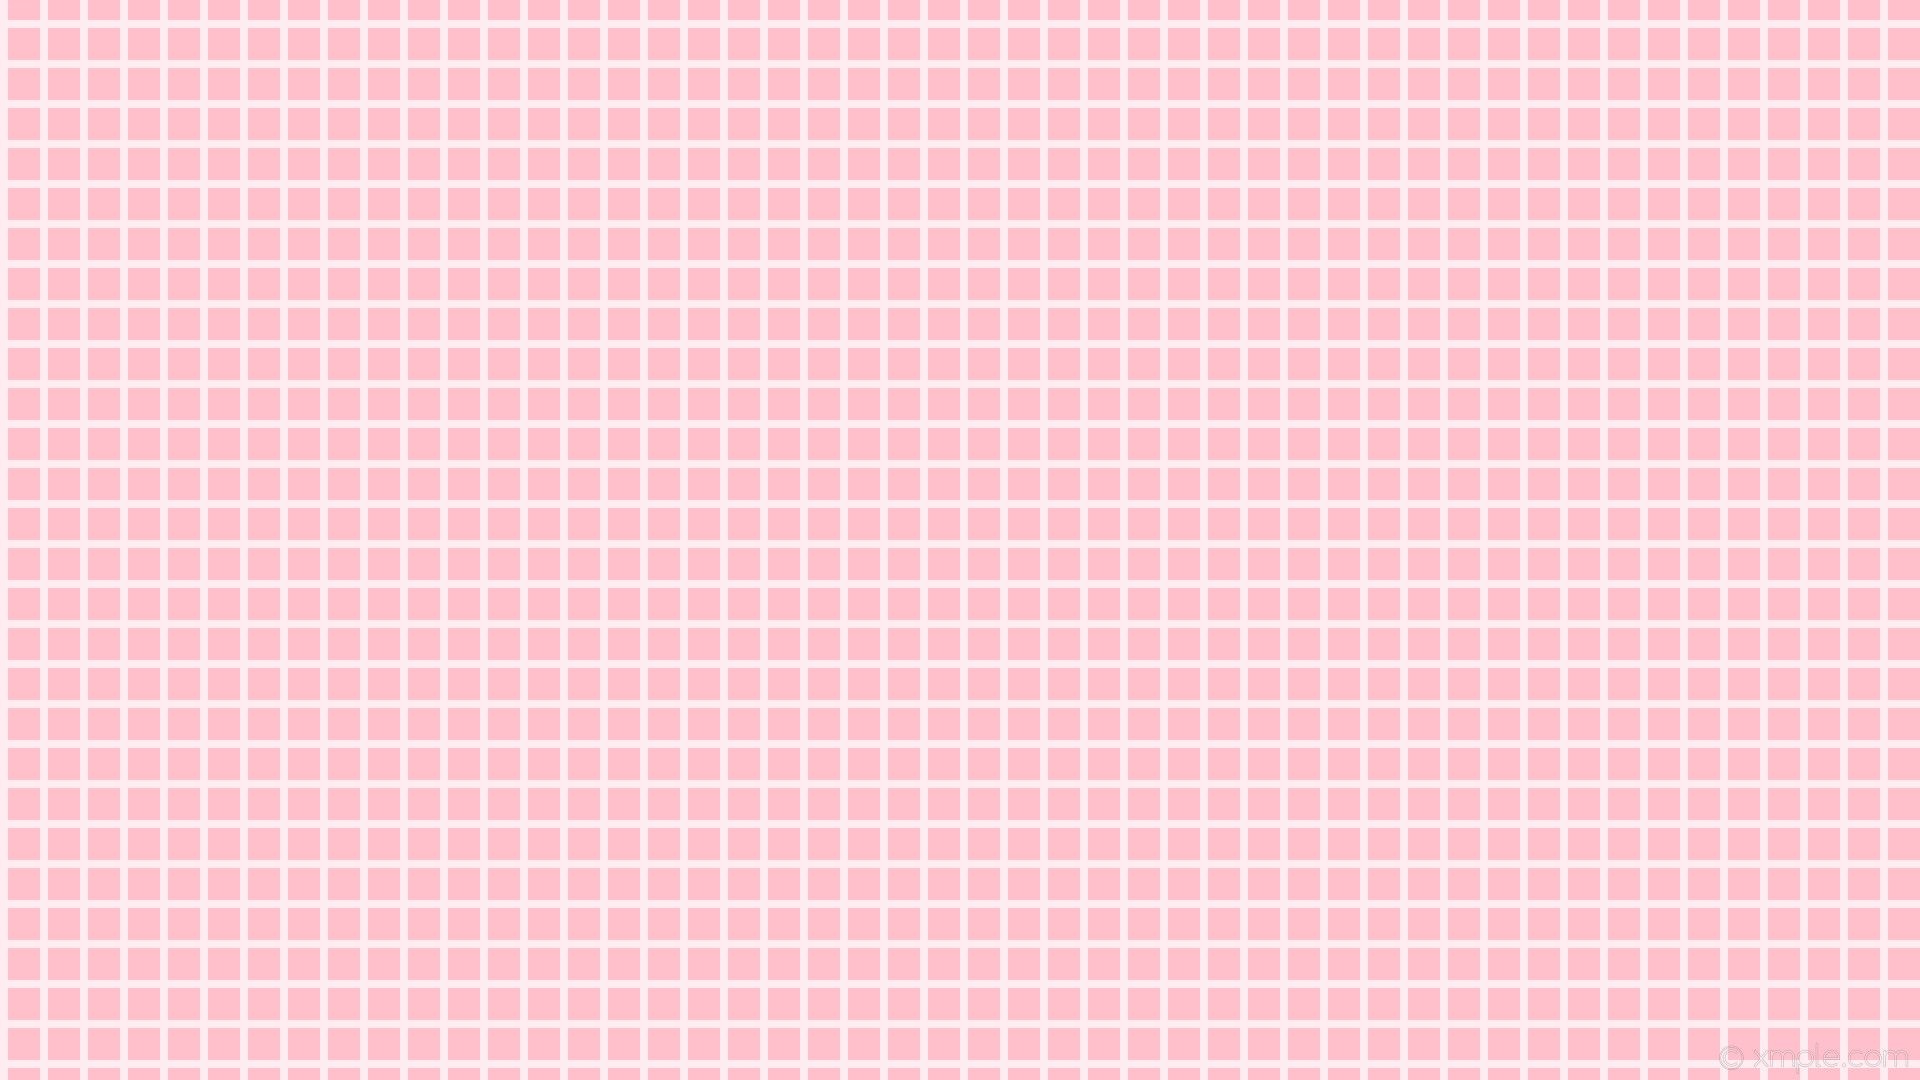 Graph Paper: Blank template with a squared coordinate grid. 1920x1080 Full HD Background.